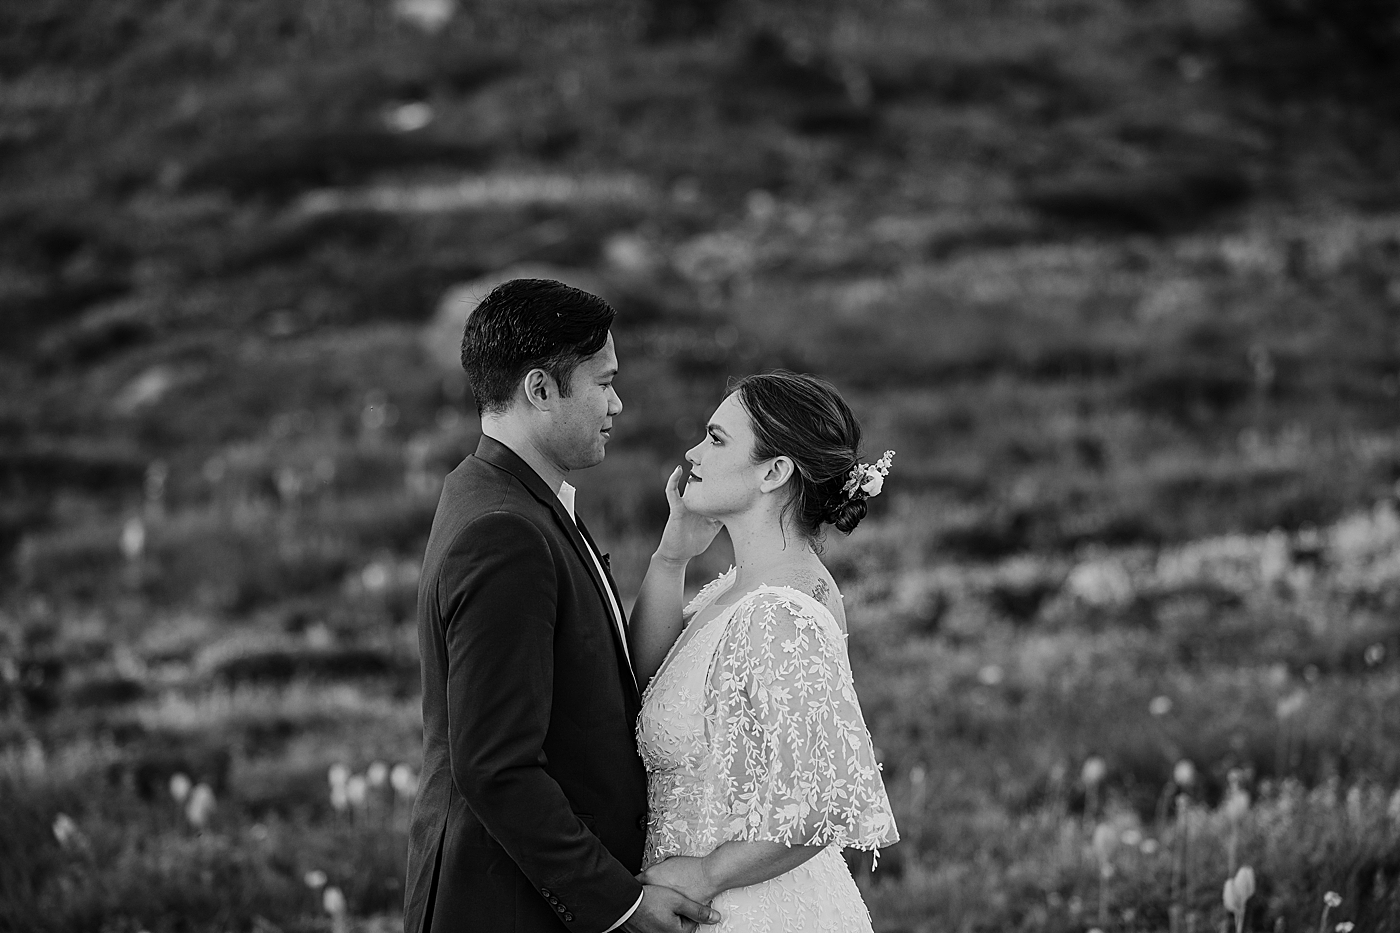 Sweet moment between the bride and groom during intimate elopement. Photo by Megan Montalvo Photography.